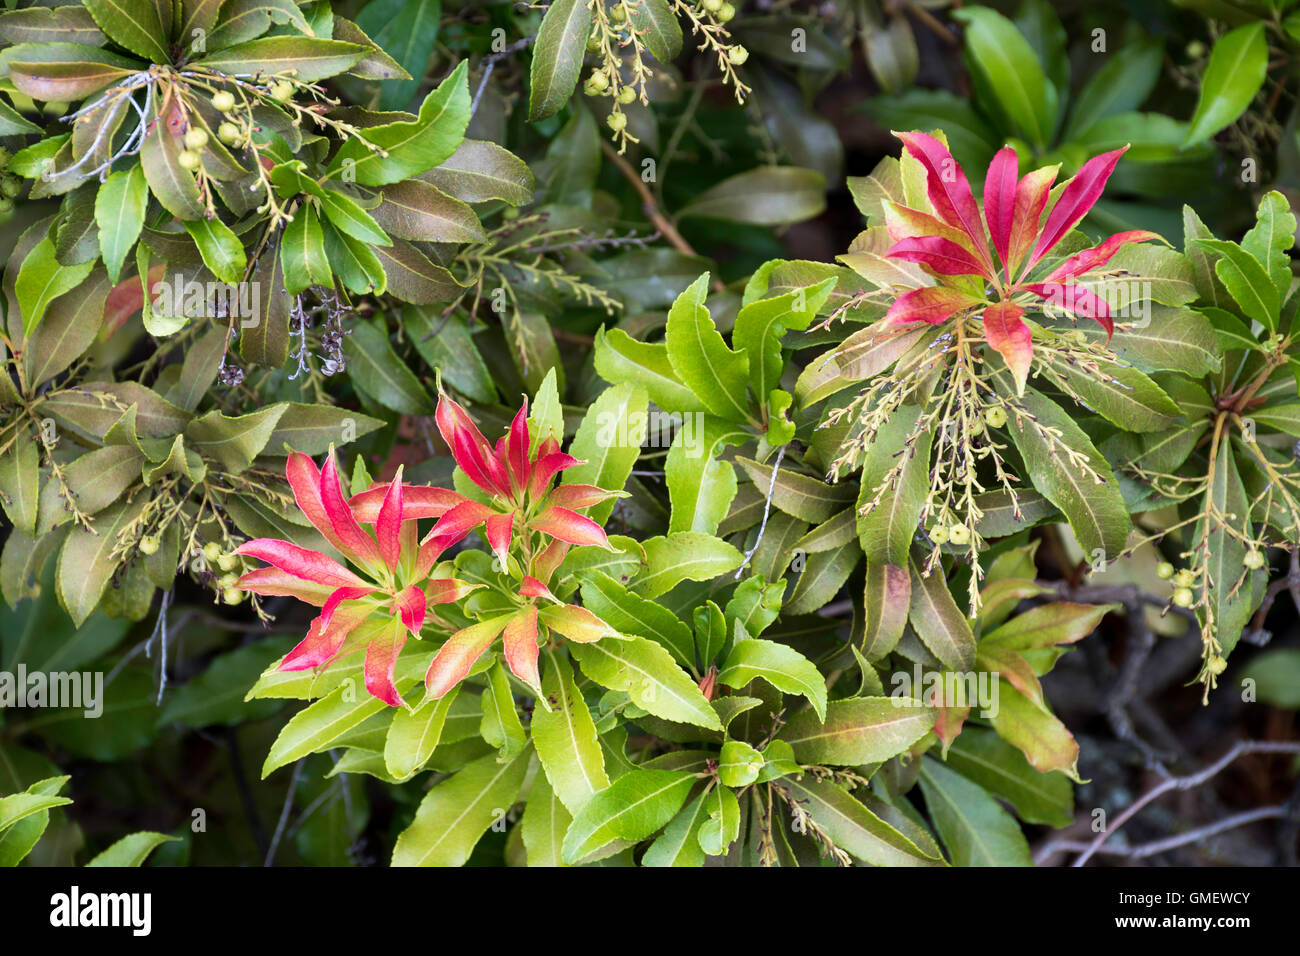 Evergreen Pieris branch showing new red growth against green leaves. Stock Photo